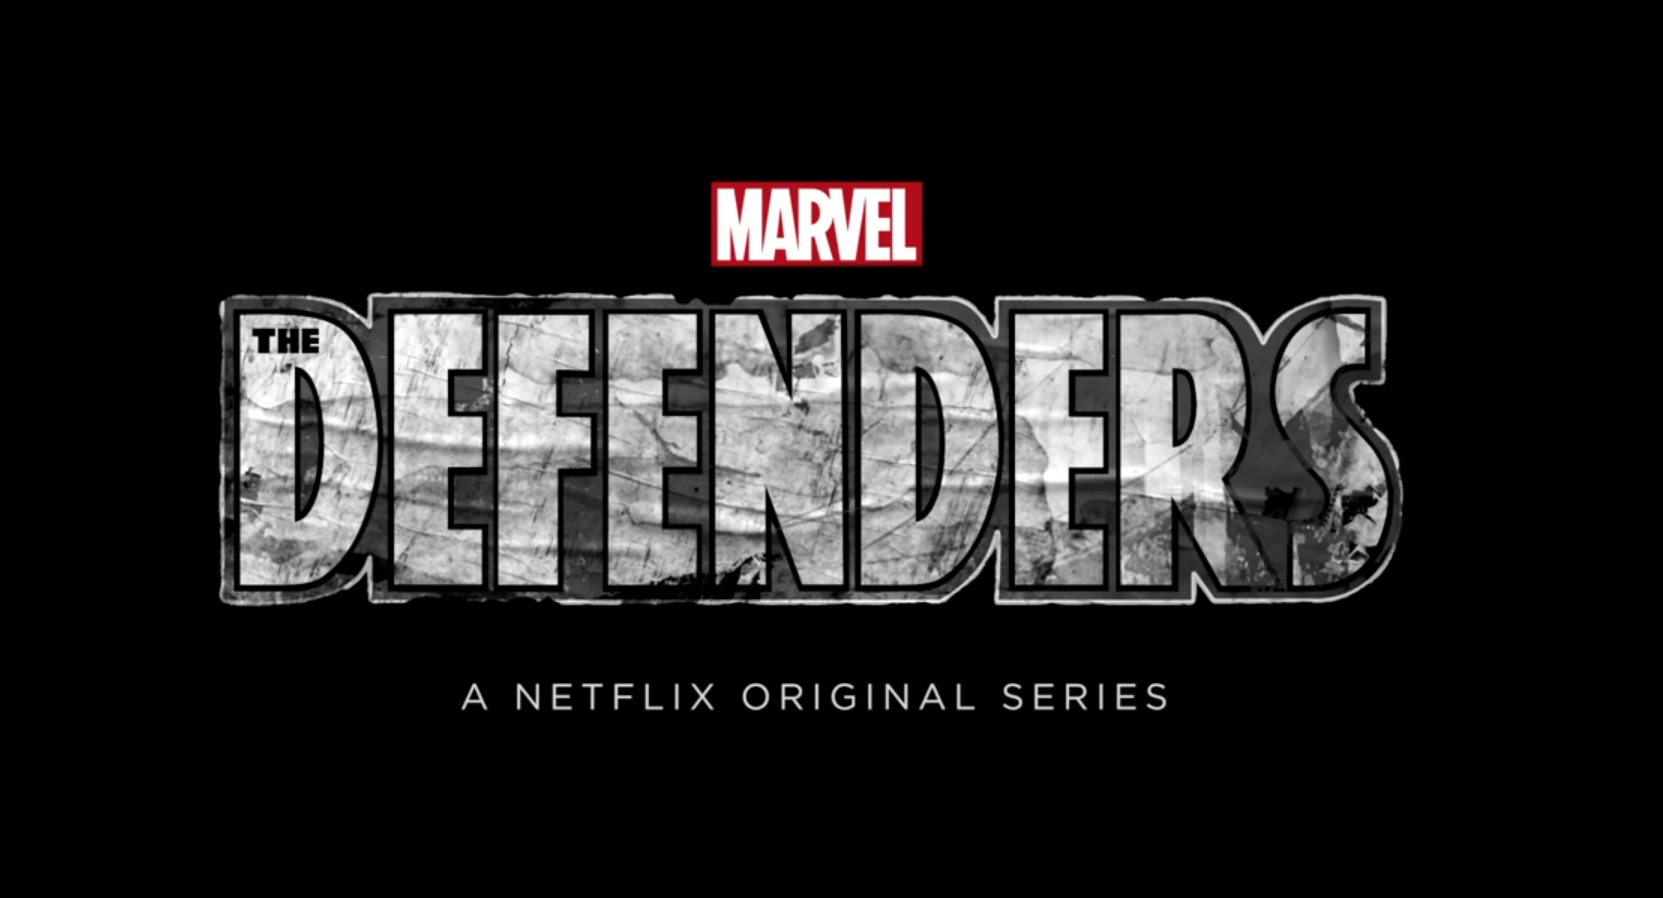 Marvel’s The Defenders Trailer Has Been Released And It Looks Amazing!